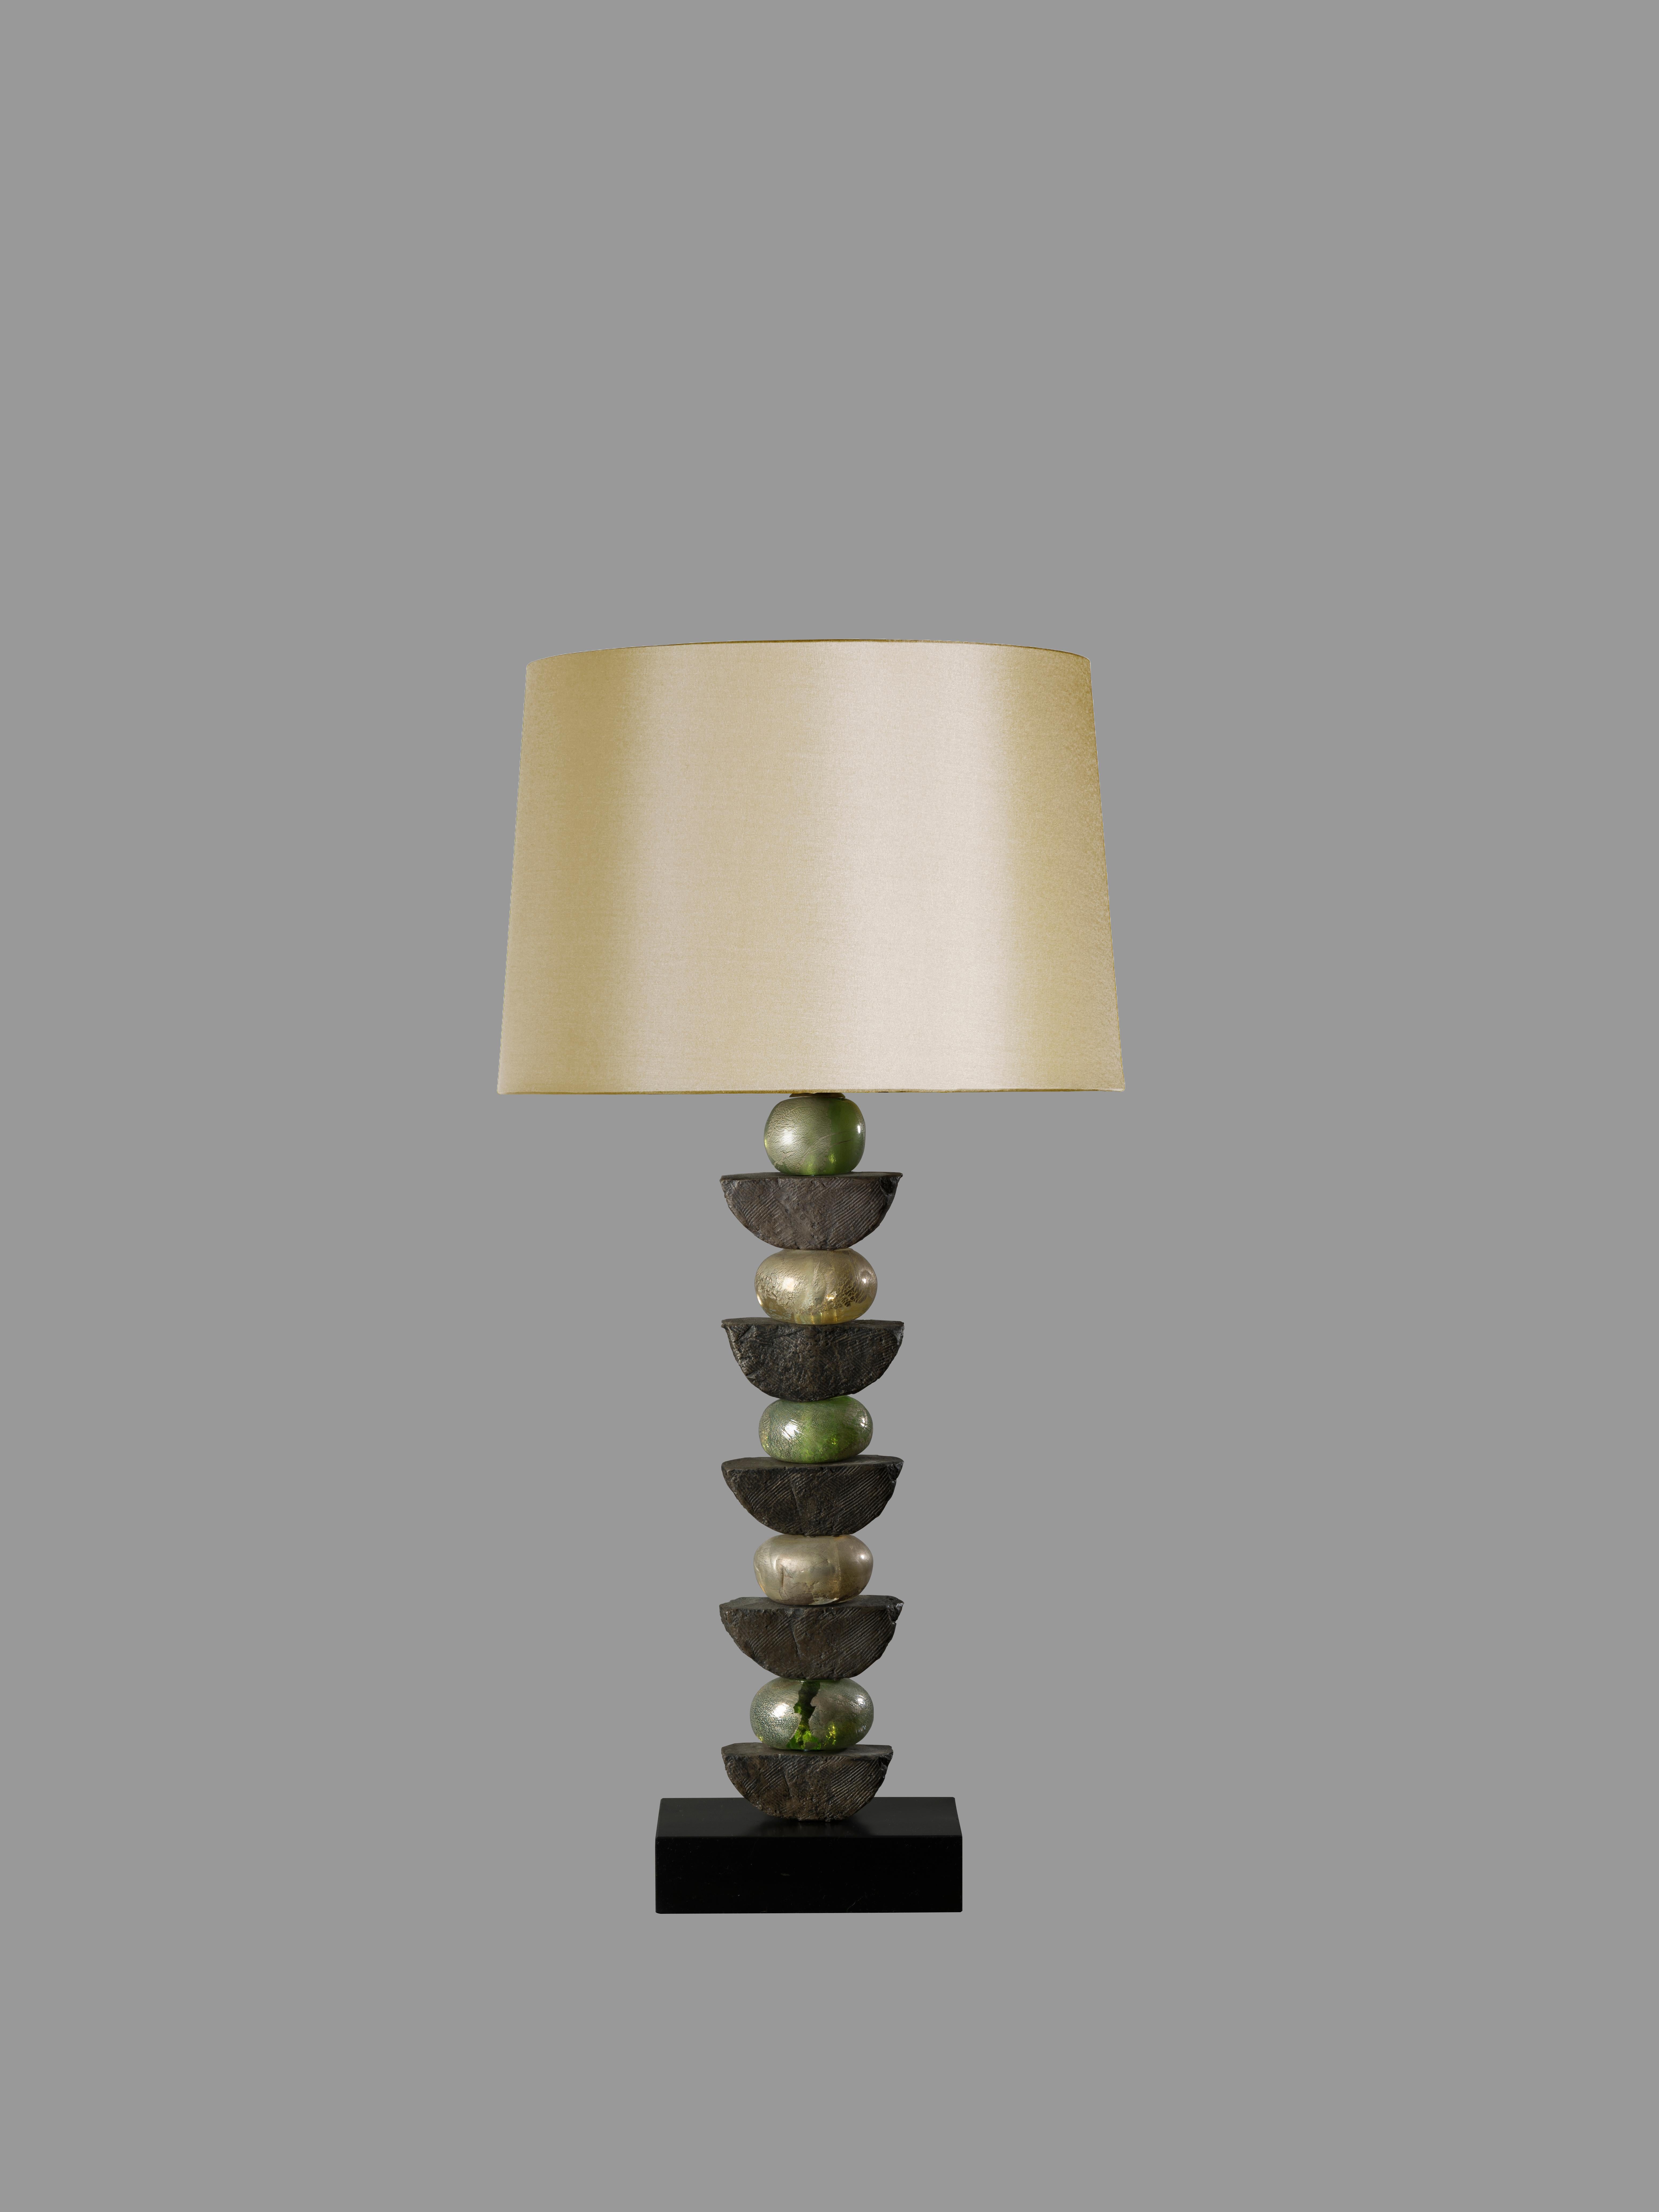 These contemporary Margit Wittig table lamp is mounted on a solid slate bases and feature five mouth blown glass shapes in green with gold and silver leaf and multiple resin hand-cast semi-circles. The bronze resin elements are hand patinated to